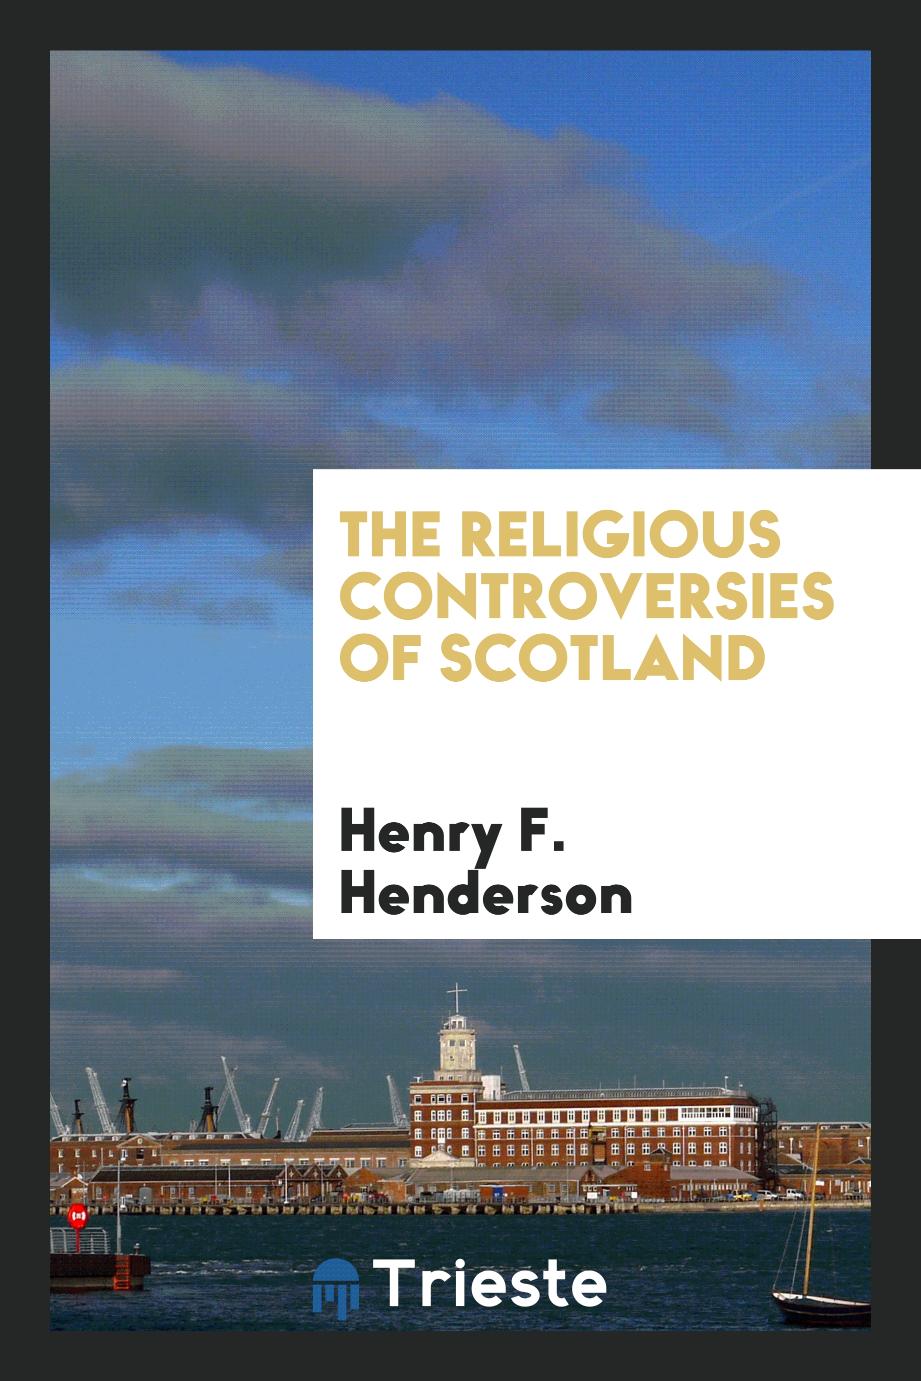 Henry F. Henderson - The religious controversies of Scotland